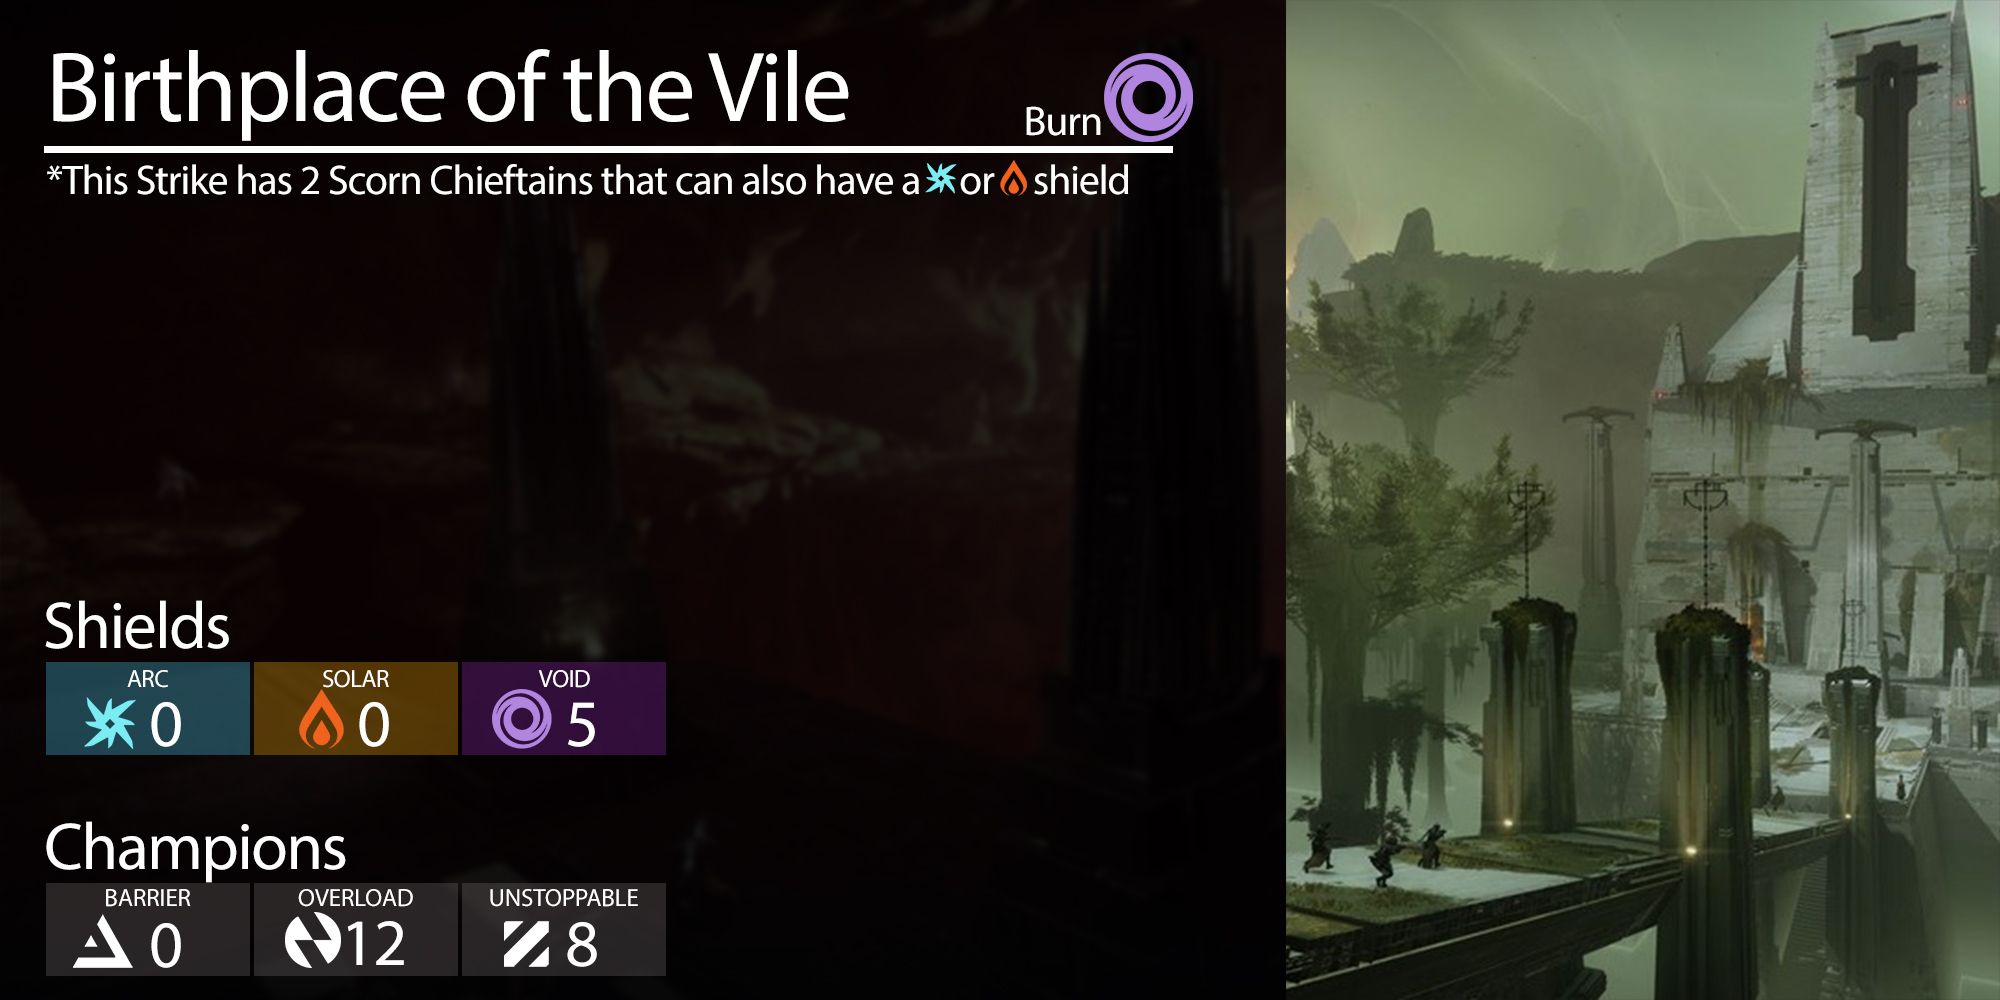 Birthplace of the Vile strike in Destiny 2